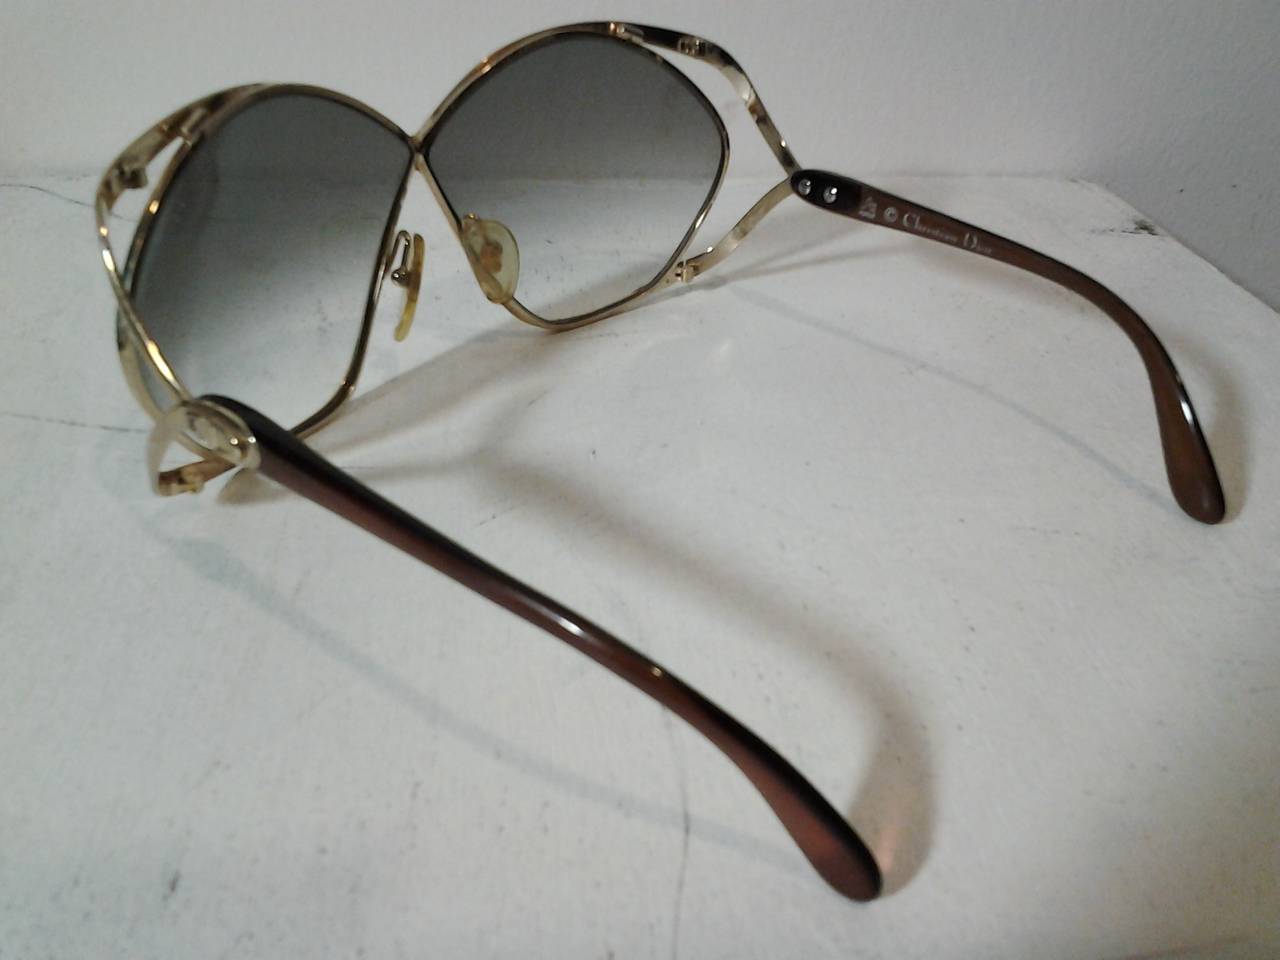 A spectacular pair of 1970s Christian Dior gradient lens sunglasses with aerodynamic metal work frames.